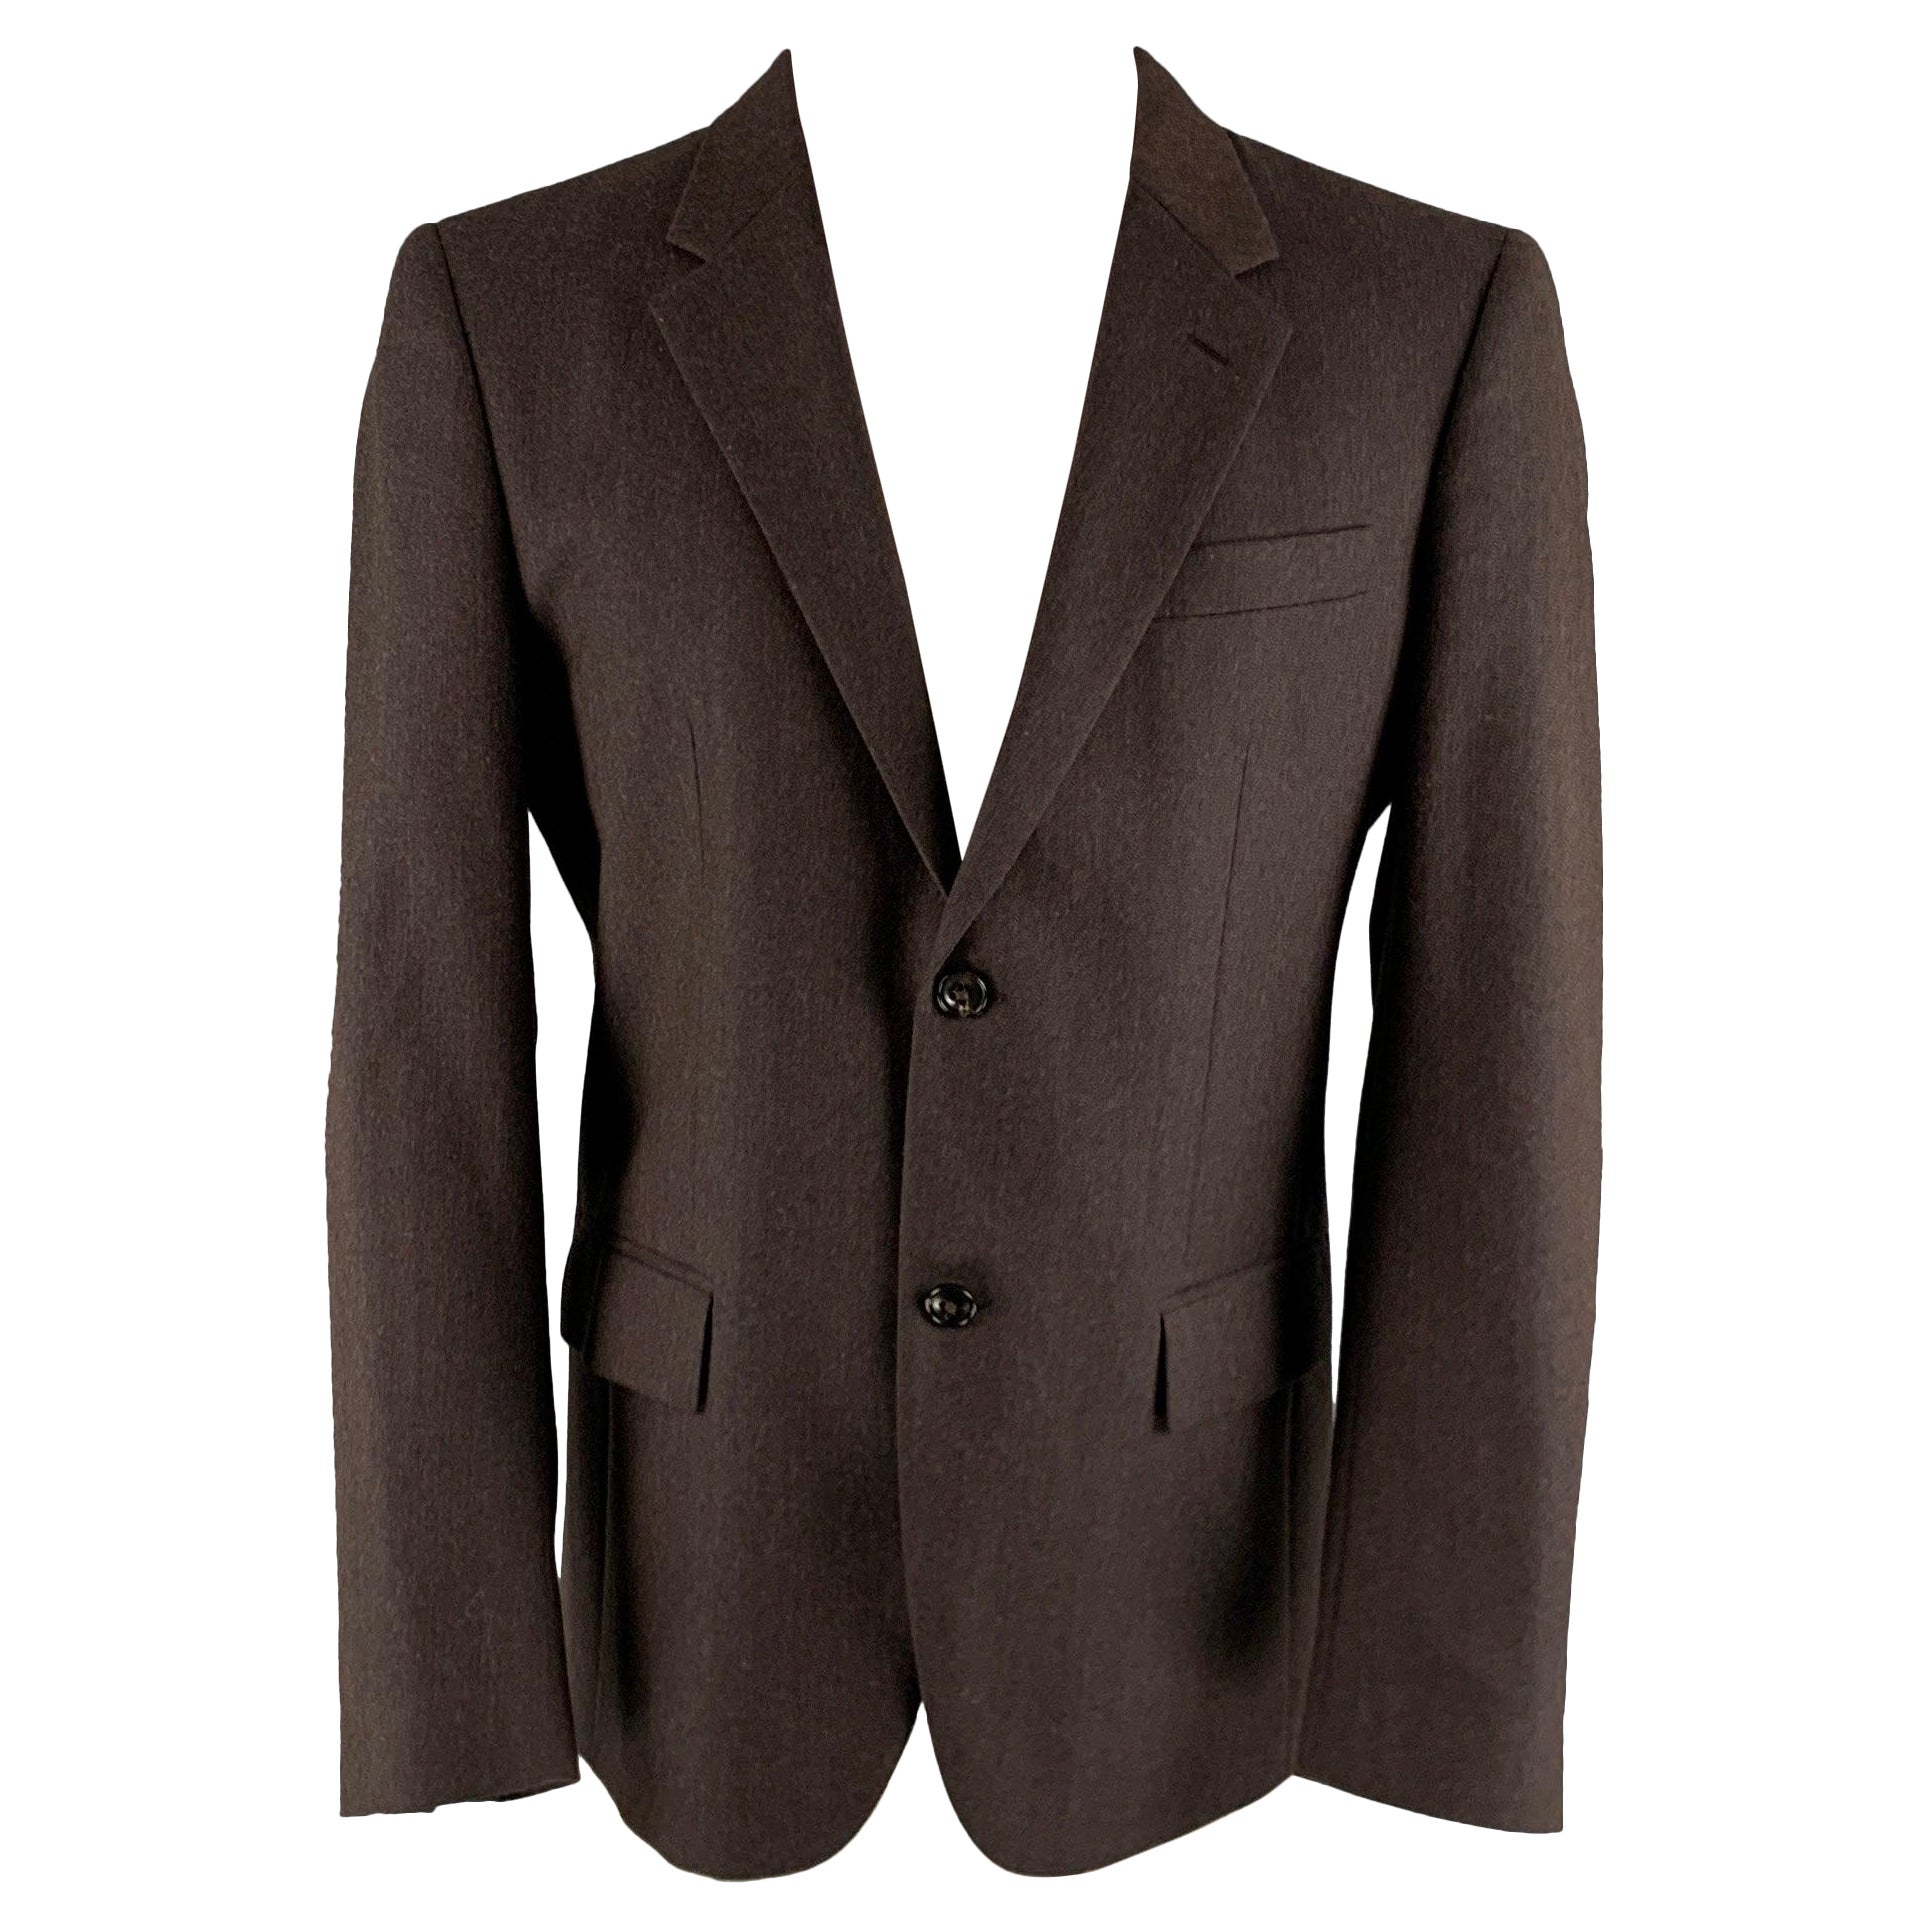 MARC JACOBS Size 38 Brown Solid Wool Notch Lapel Sport Coat For Sale